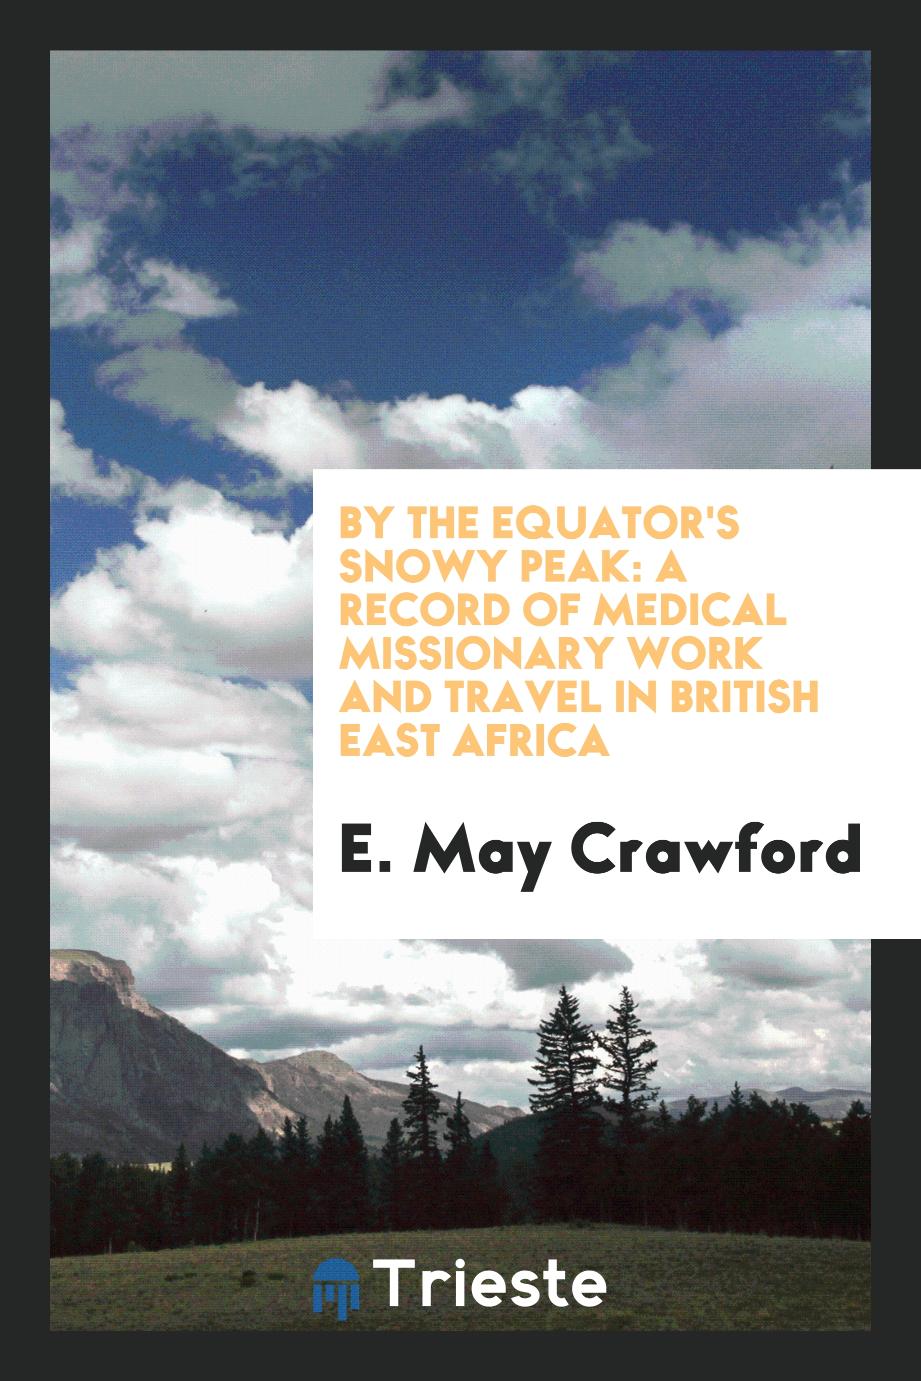 By the equator's snowy peak: a record of medical missionary work and travel in British East Africa